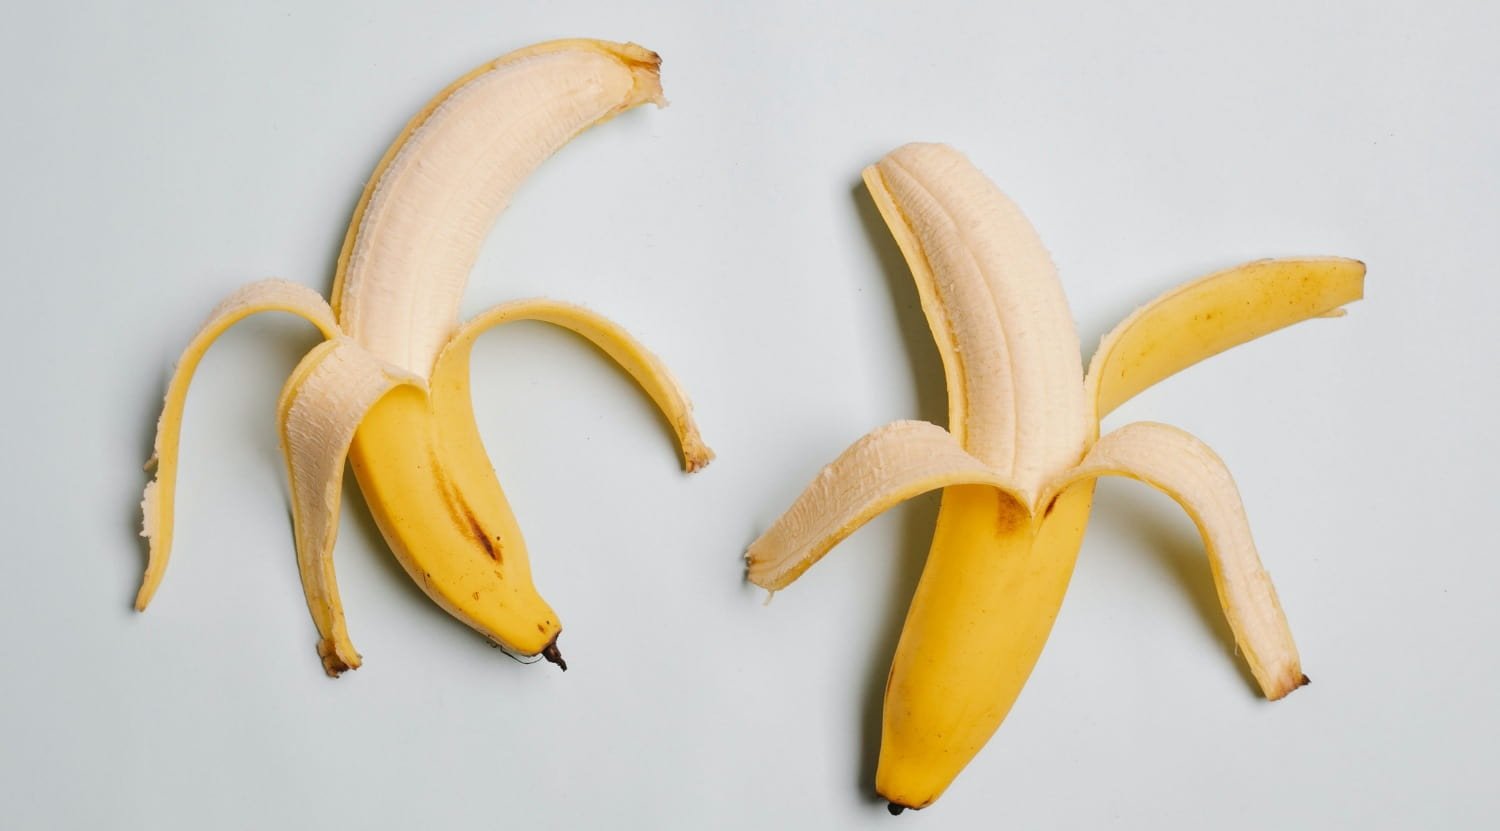 Two ripe bananas are placed on the table